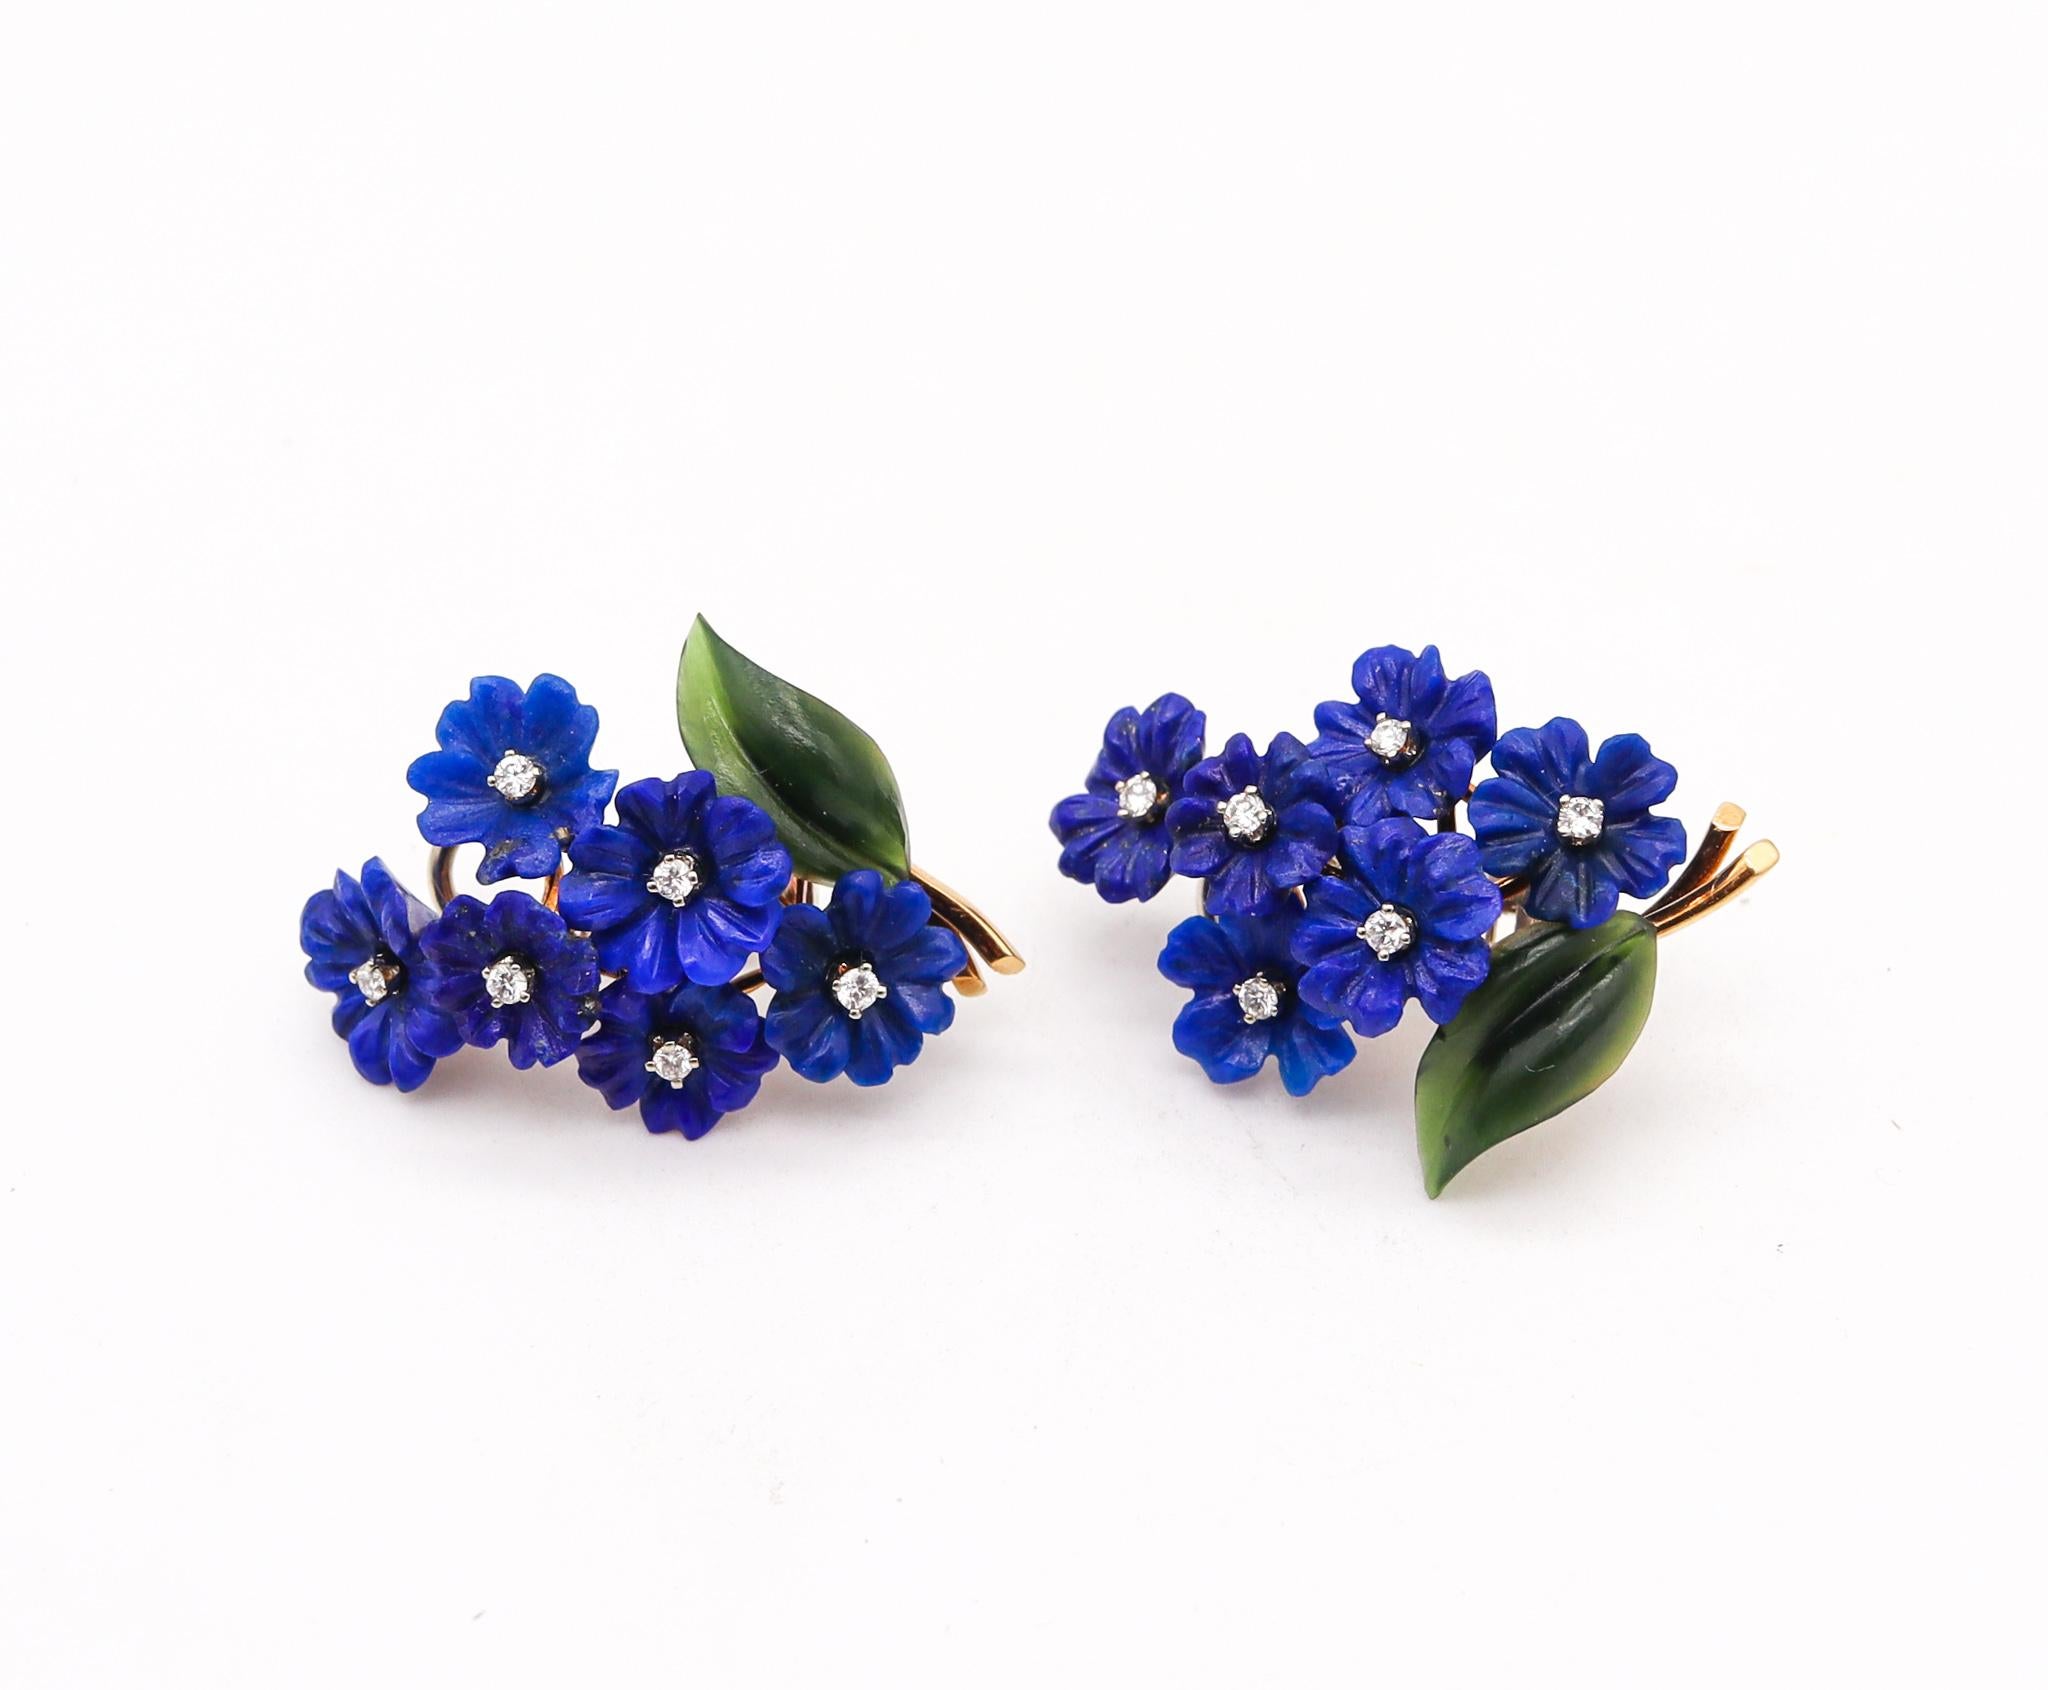 Austrian colorful floral bouquet earrings created by Johann Hoburka

Carved gemstones flowers have been a high specialty in Austria and Germany for many years. These beautiful colorful pair of organic earrings has been made at the atelier of Johann